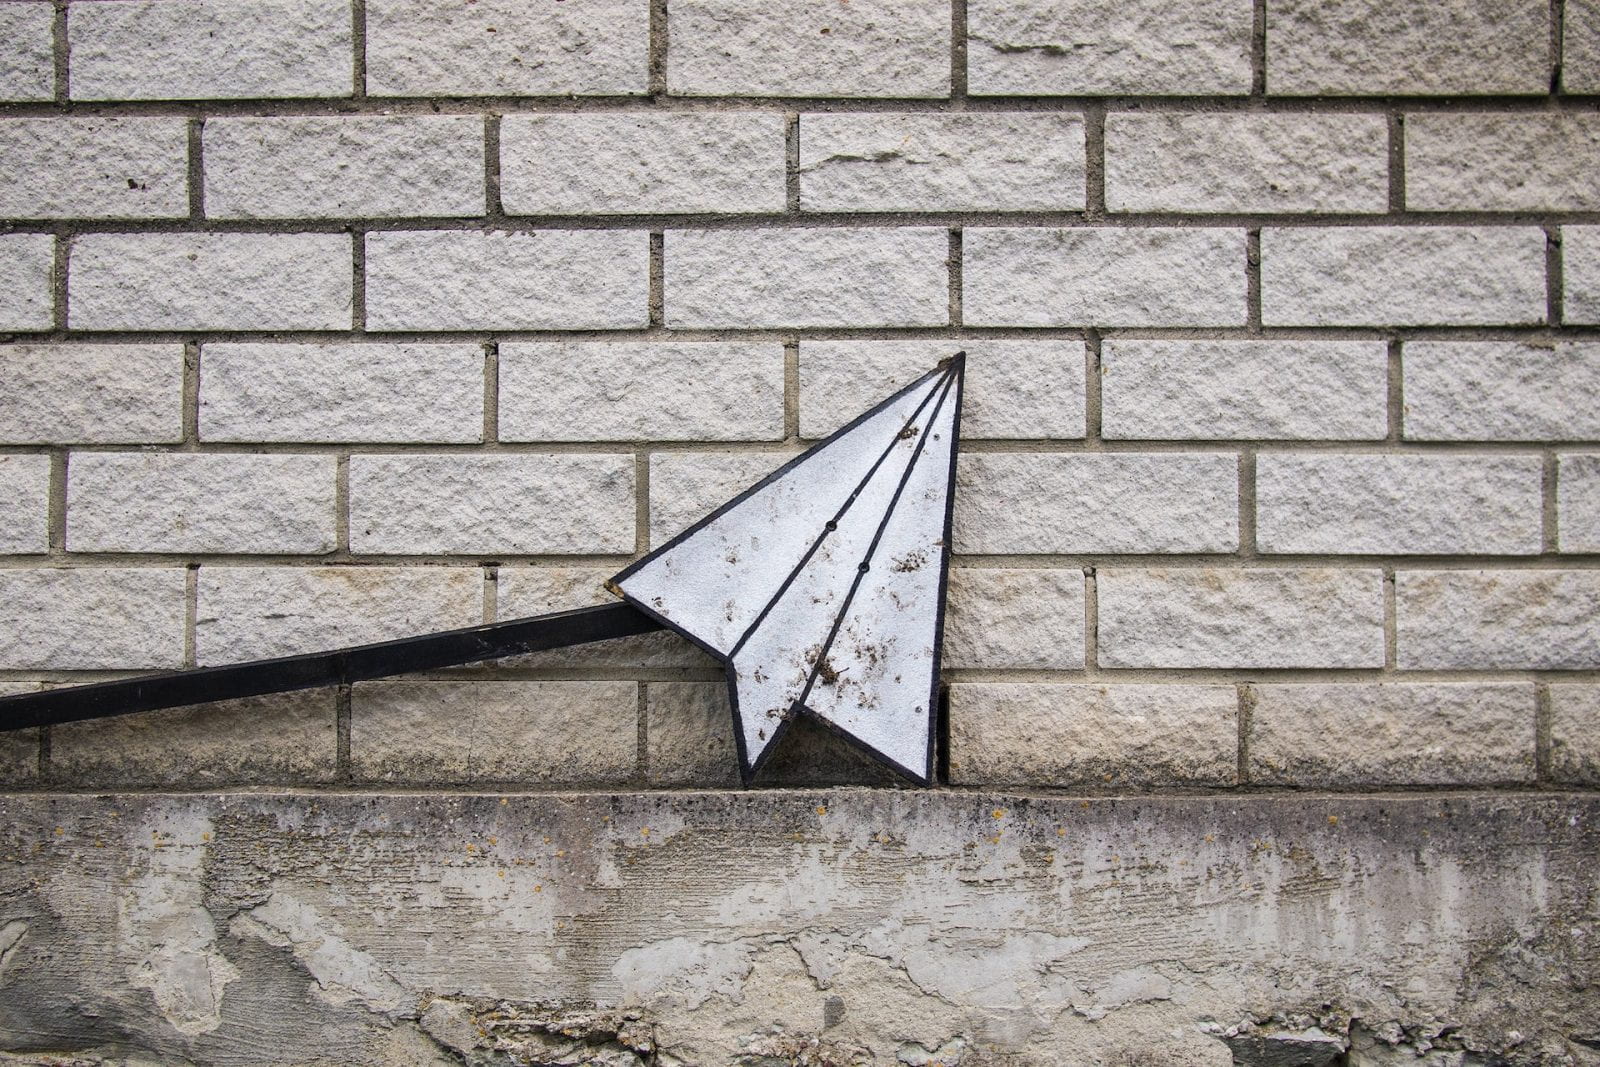 Image of a brick wall with a folded up paper airplane